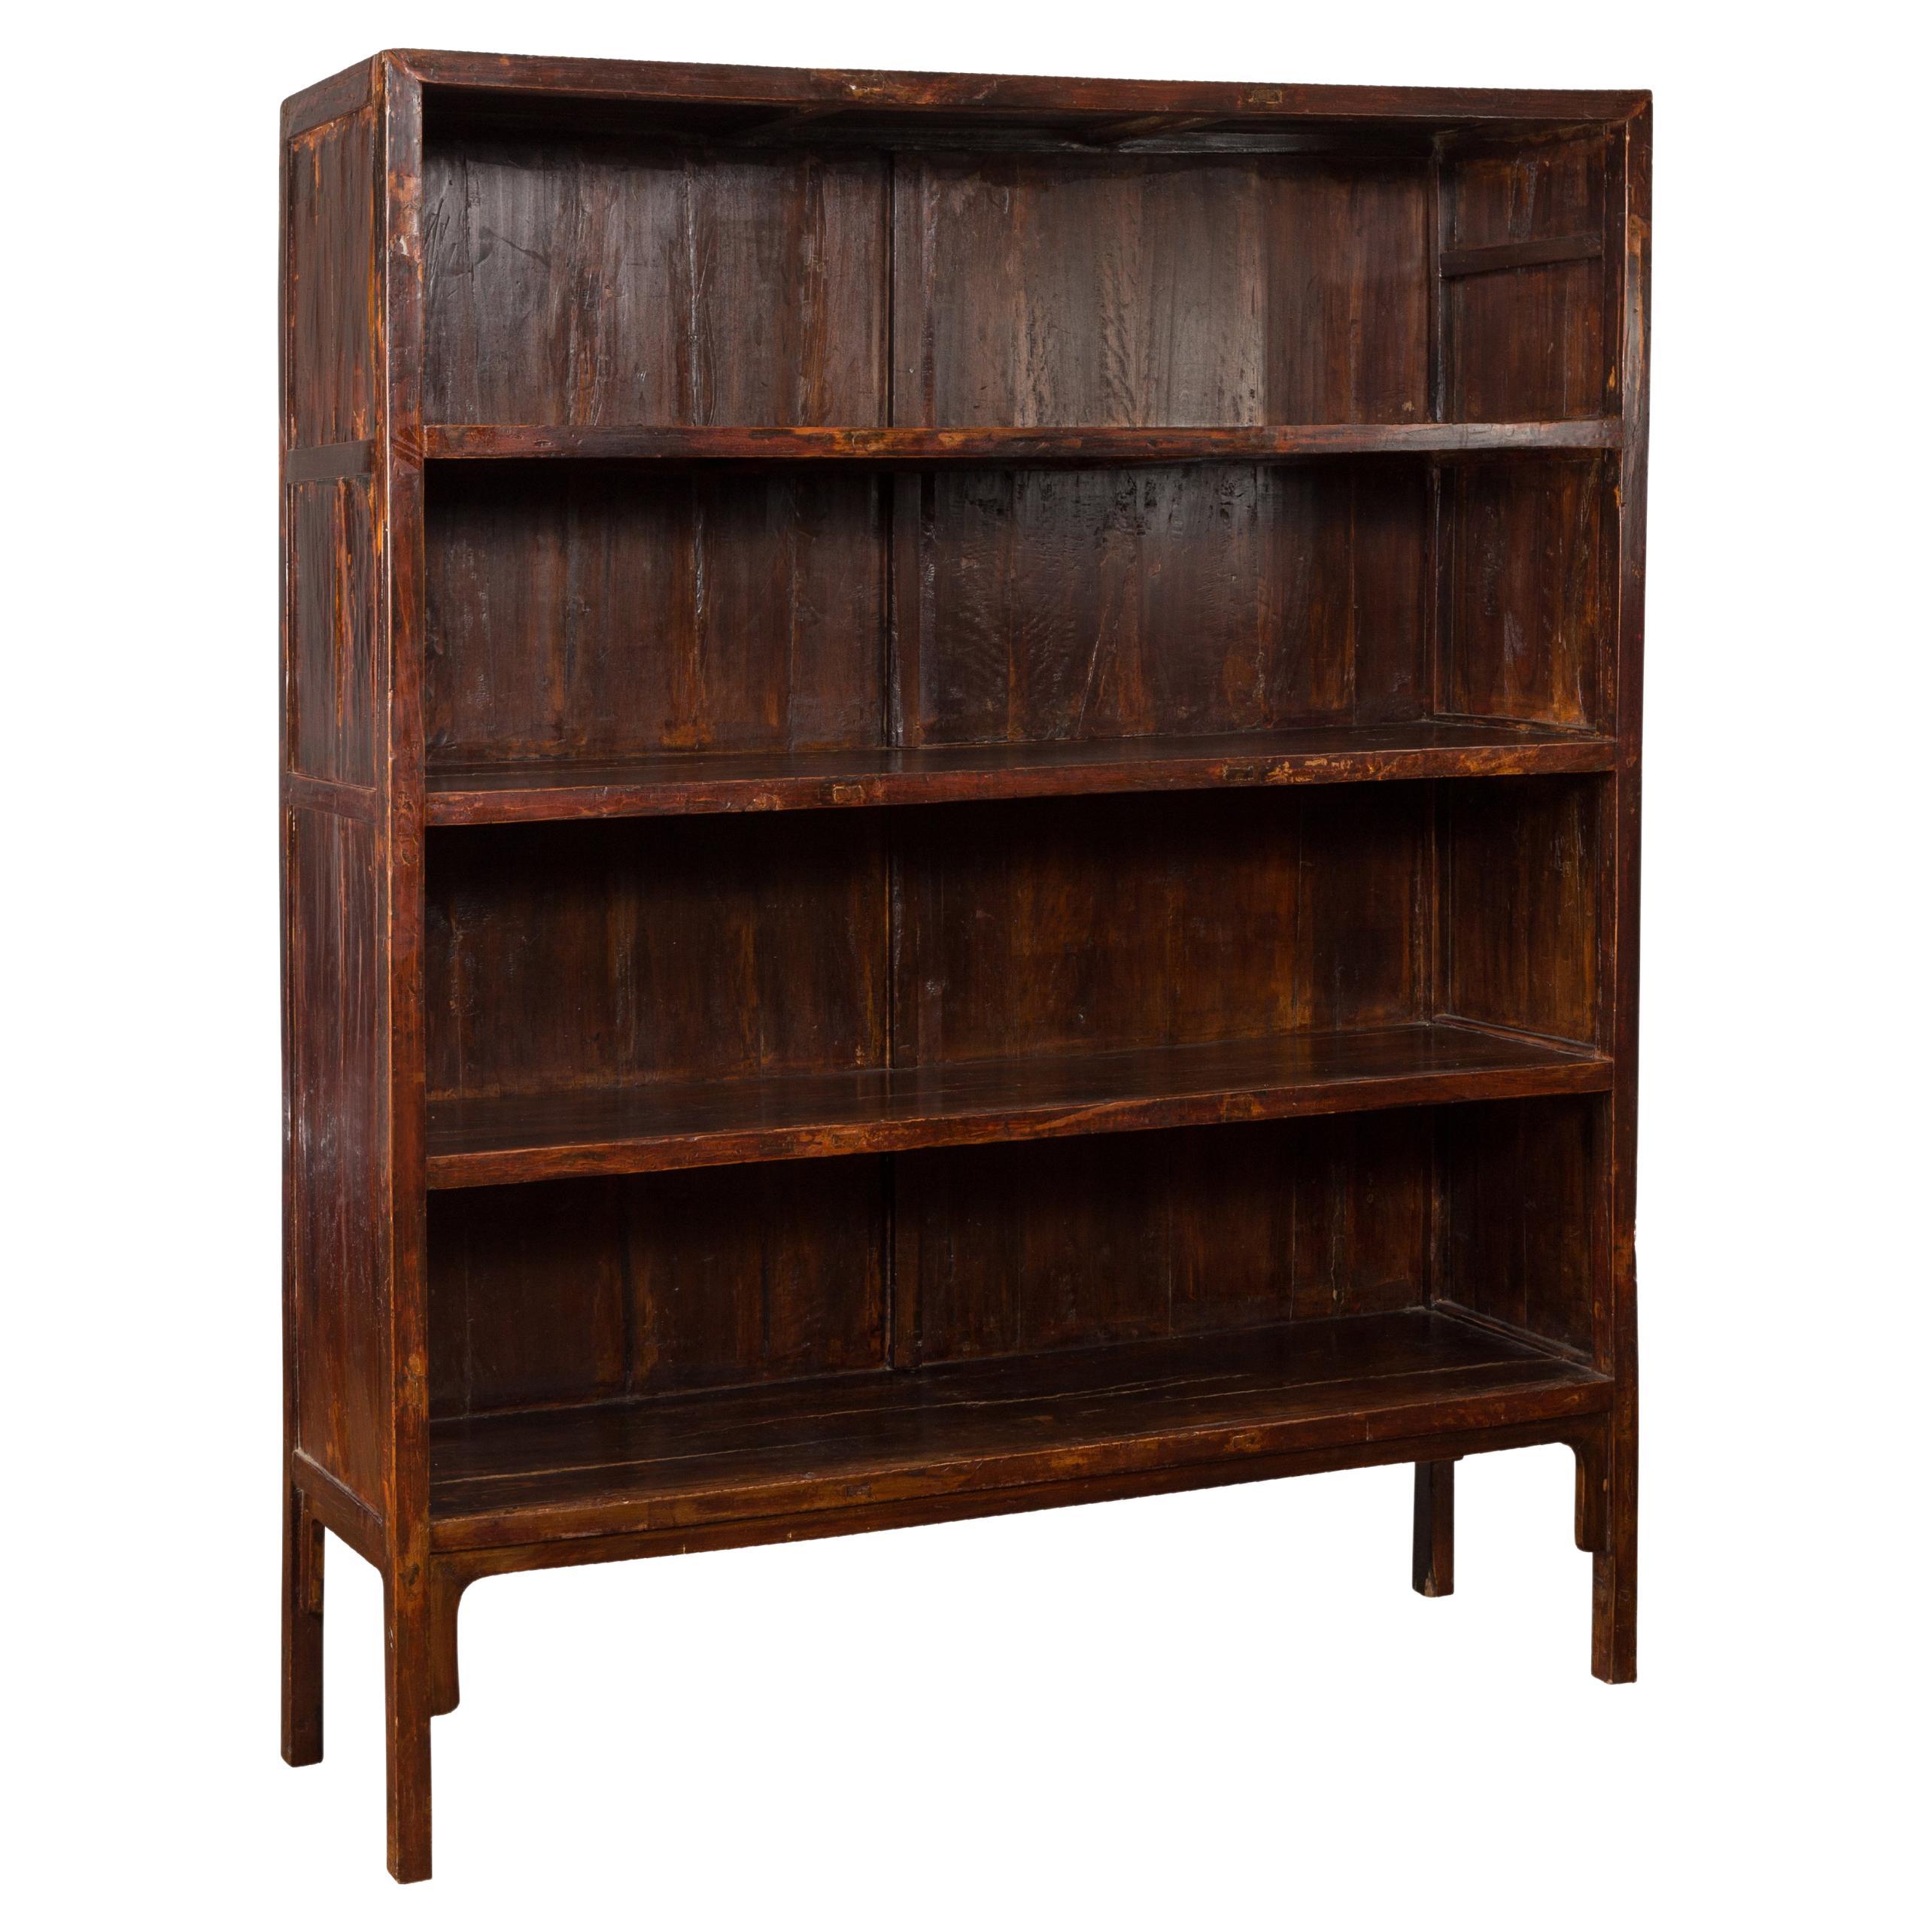 Chinese Qing Dynasty 19th Century Bookcase with Four Shelves and Dark Patina For Sale